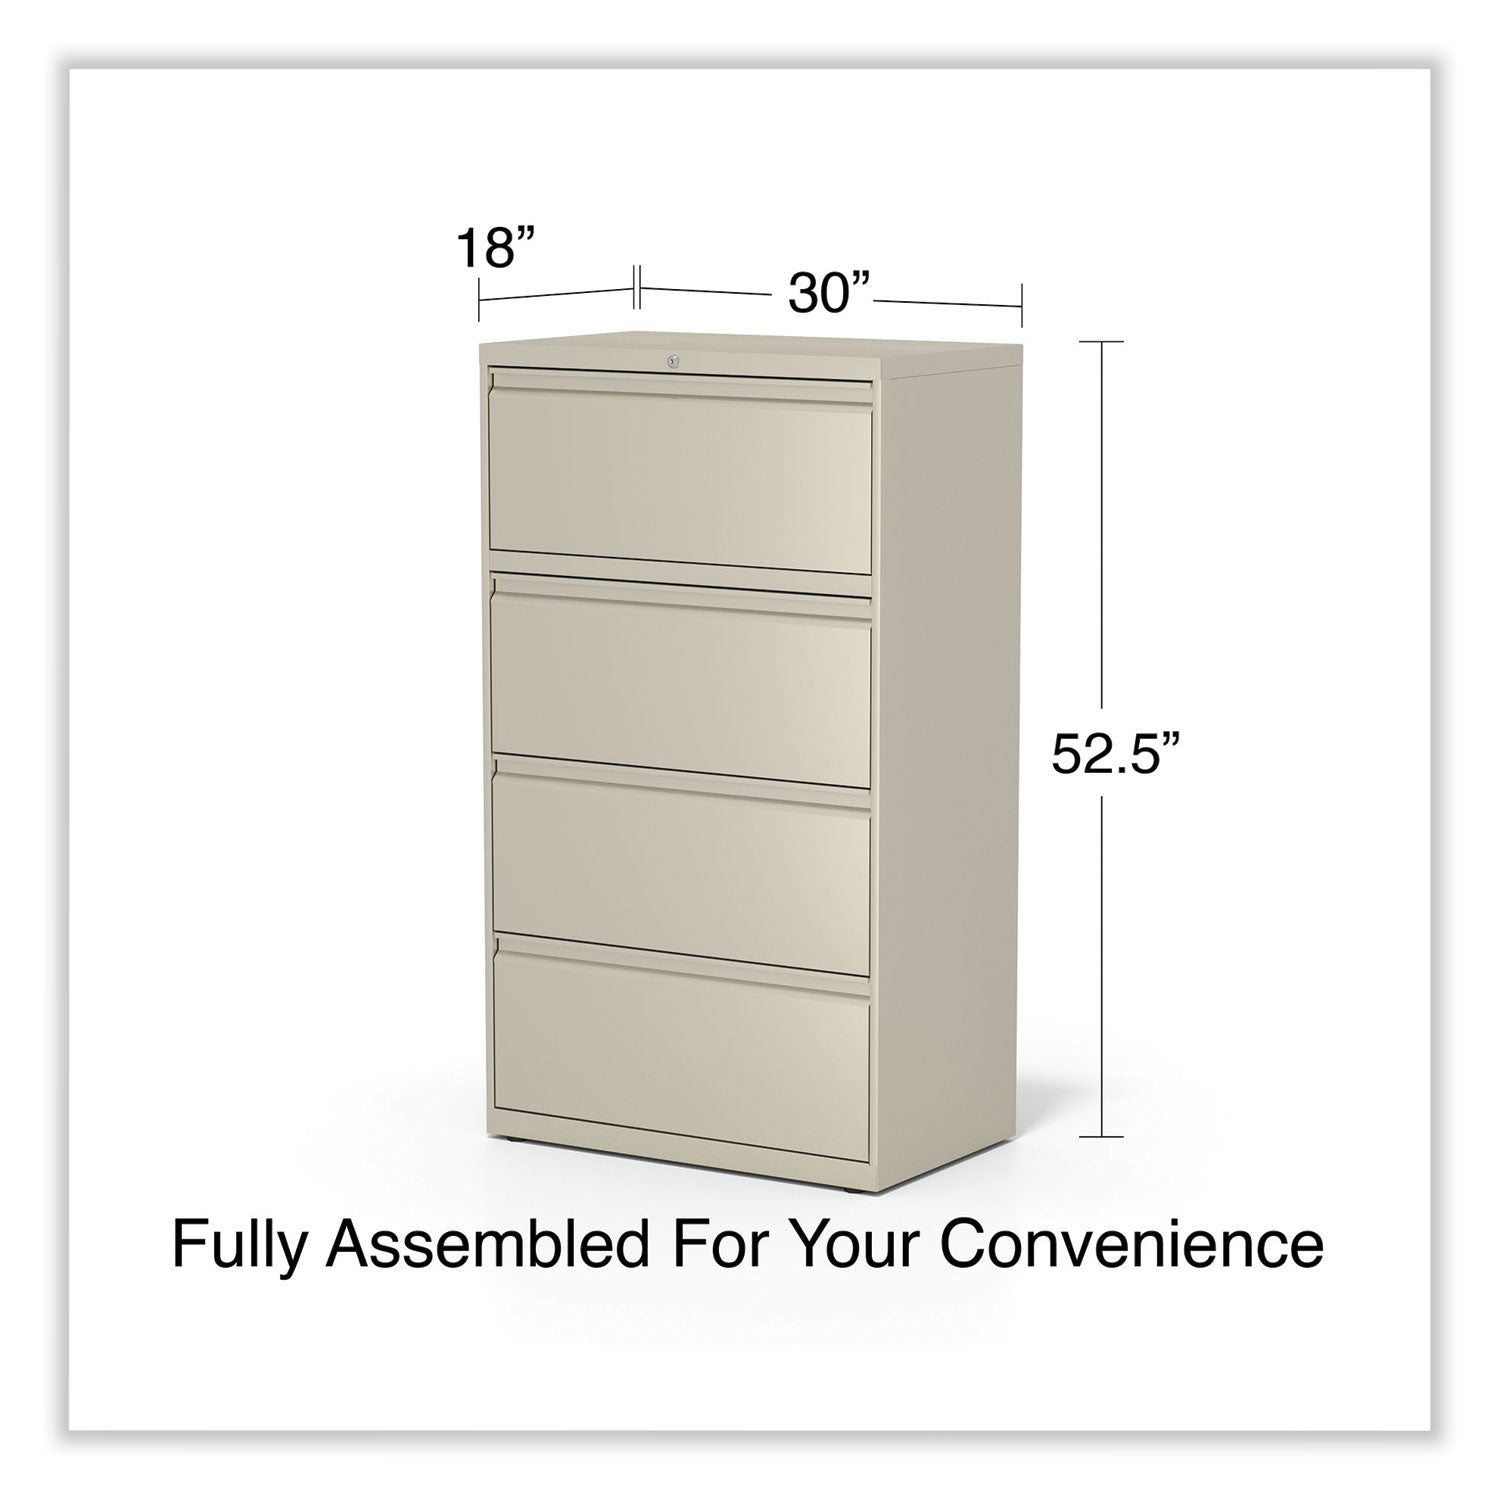 lateral-file-4-legal-letter-size-file-drawers-putty-30-x-1863-x-525_alehlf3054py - 3